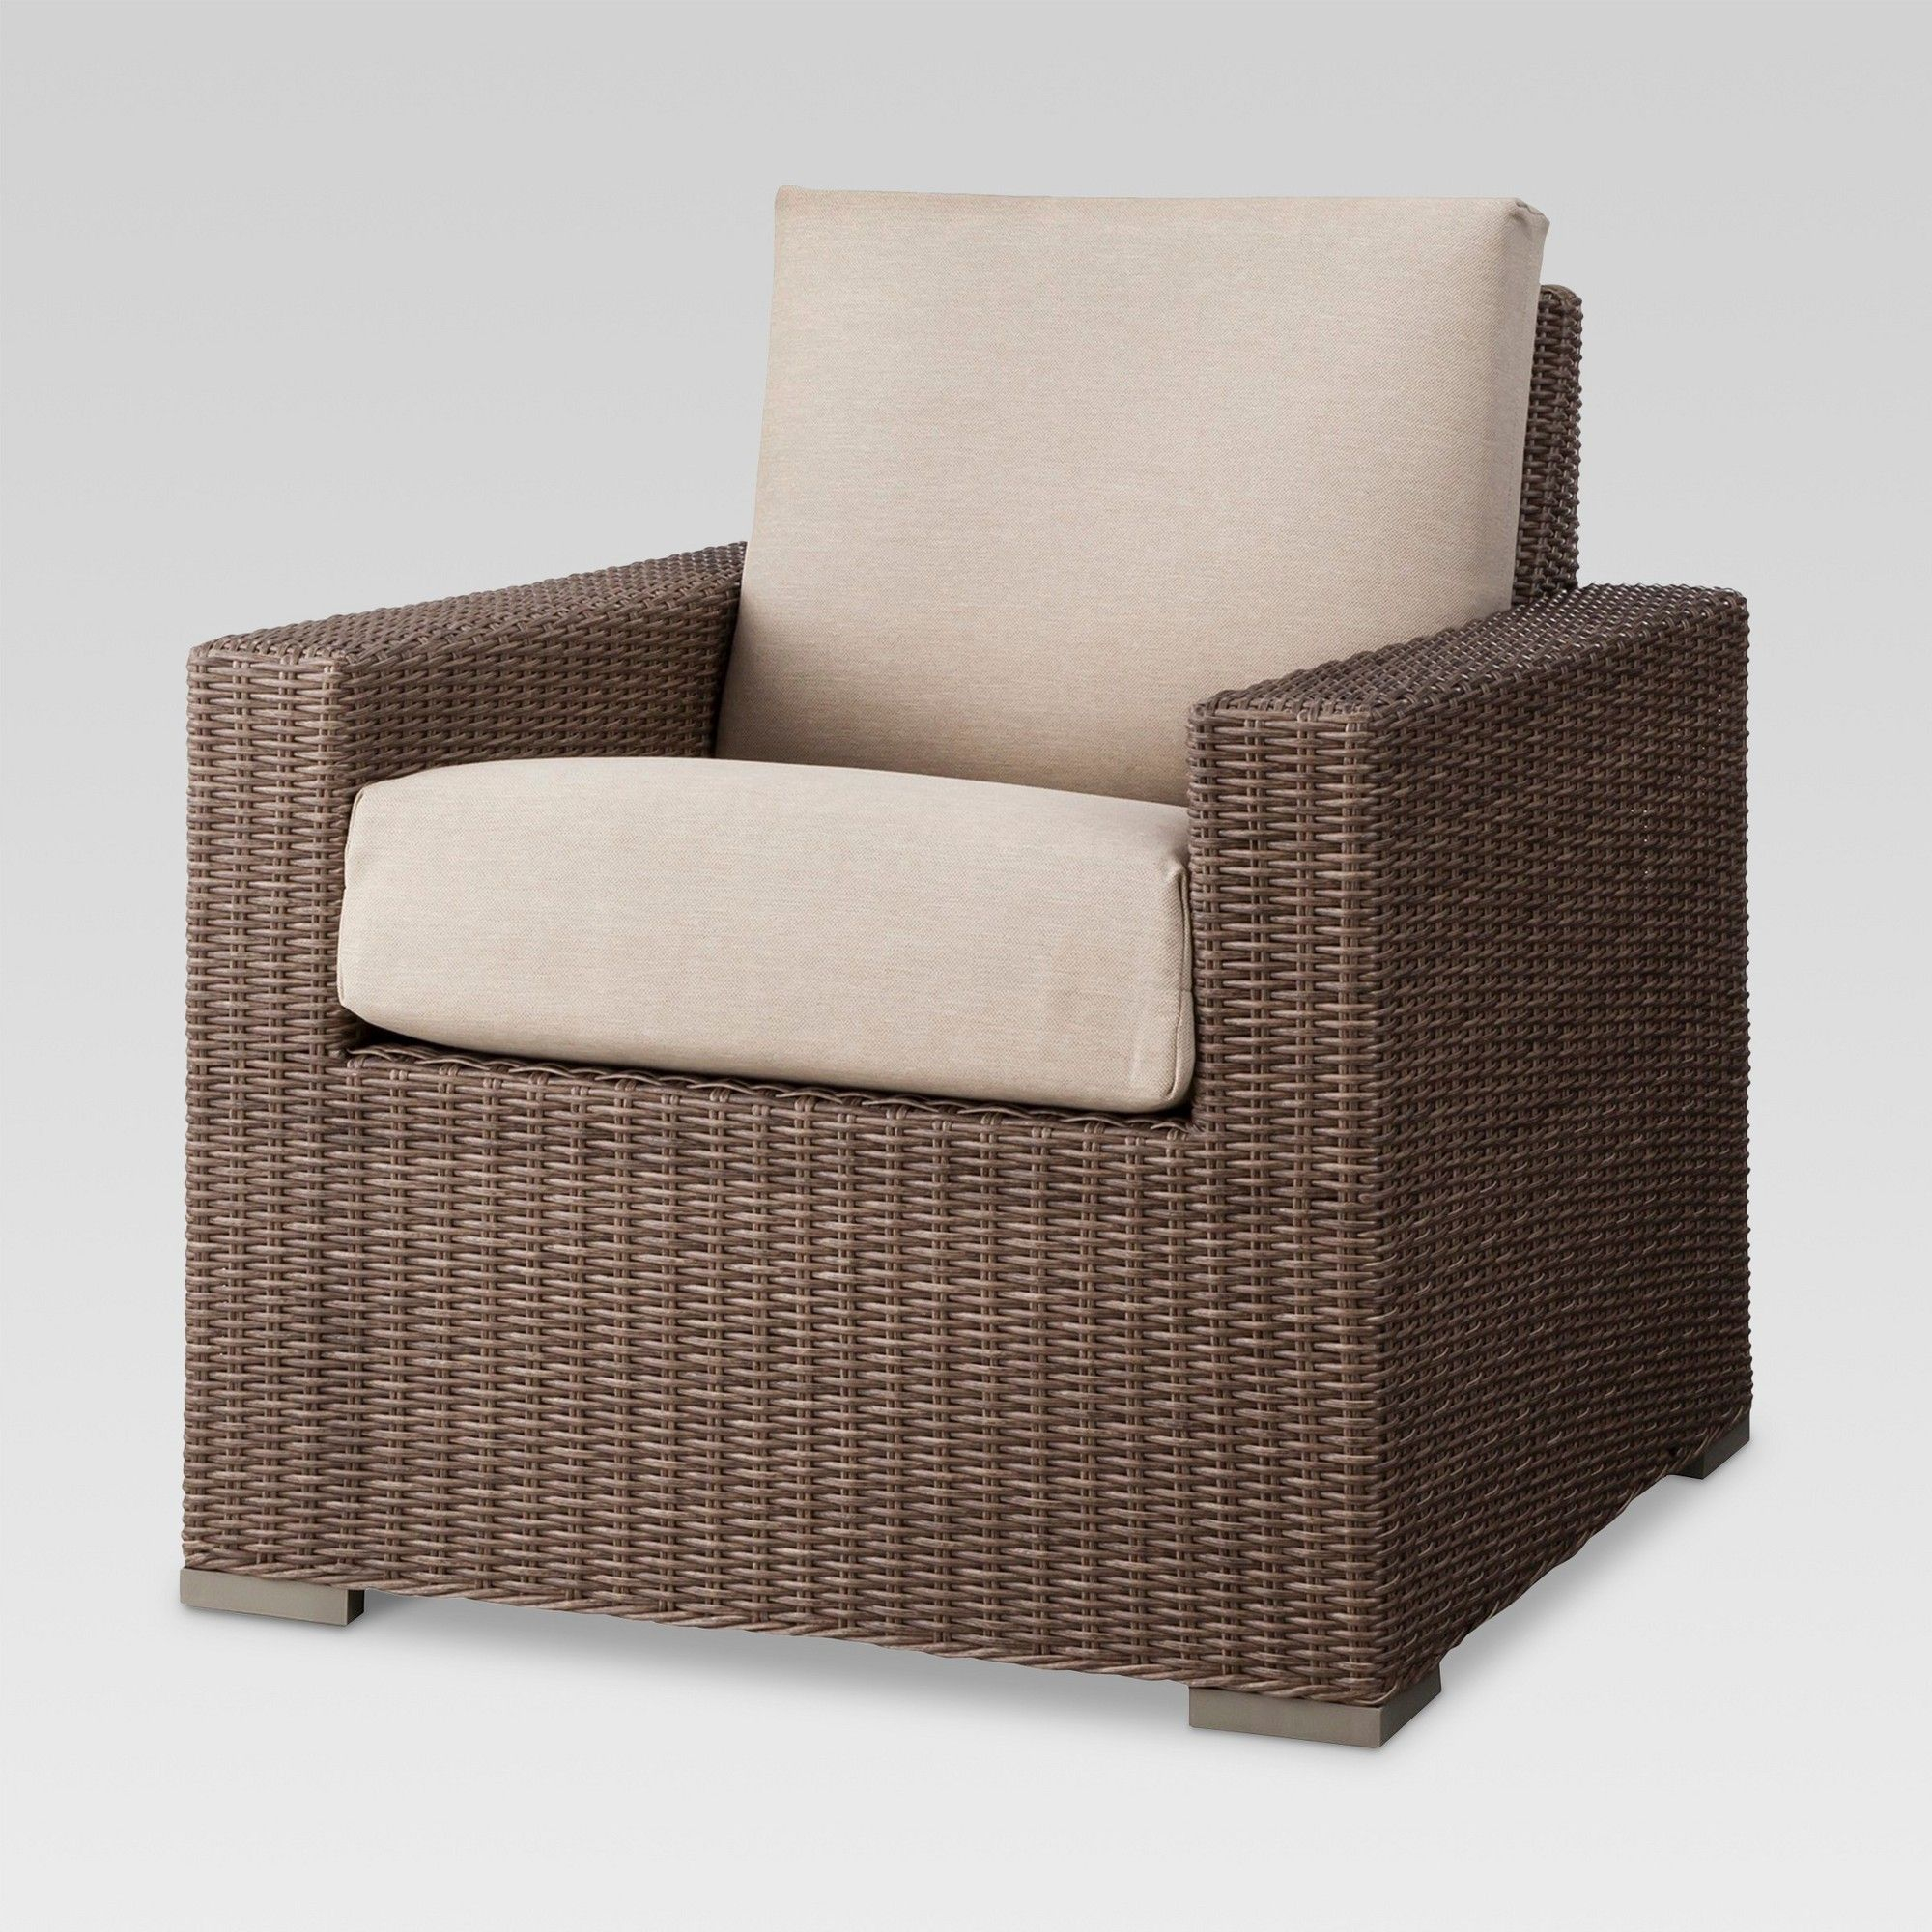 Heatherstone Wicker Patio Club Chair Tan Threshold within proportions 2000 X 2000